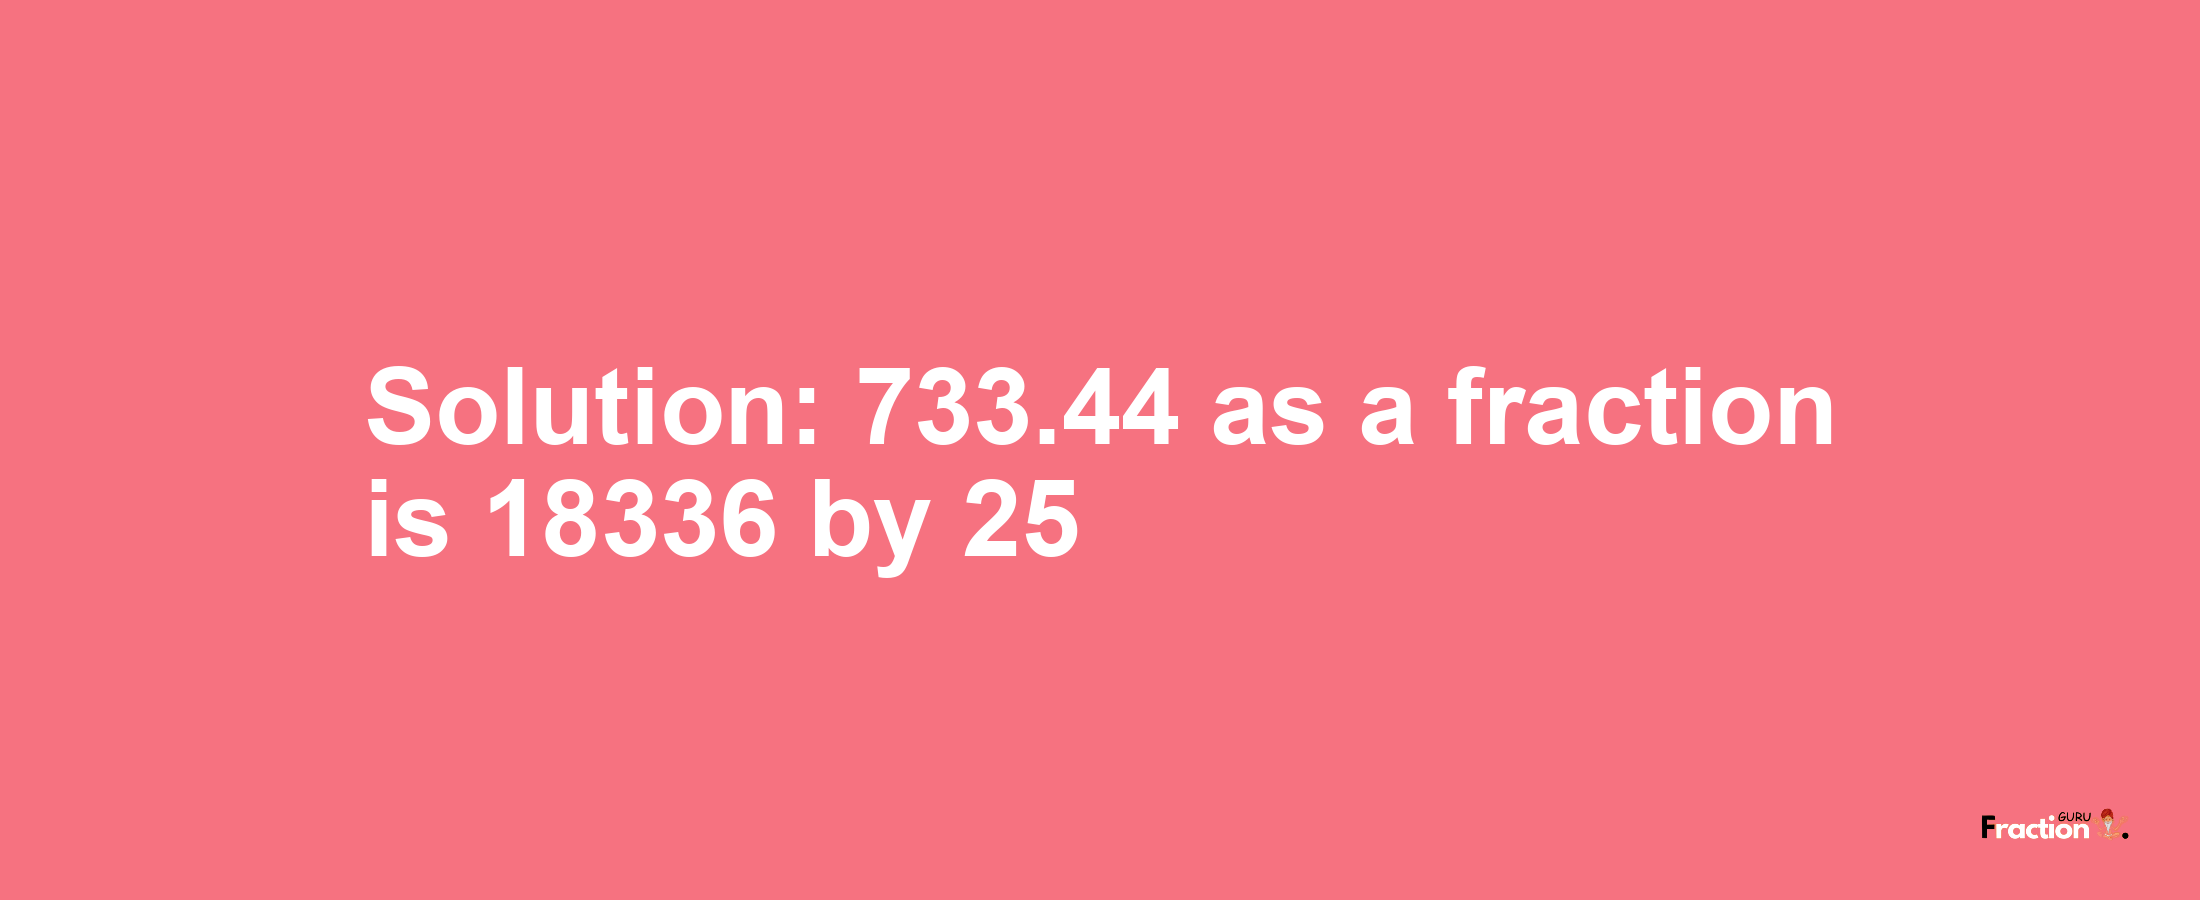 Solution:733.44 as a fraction is 18336/25